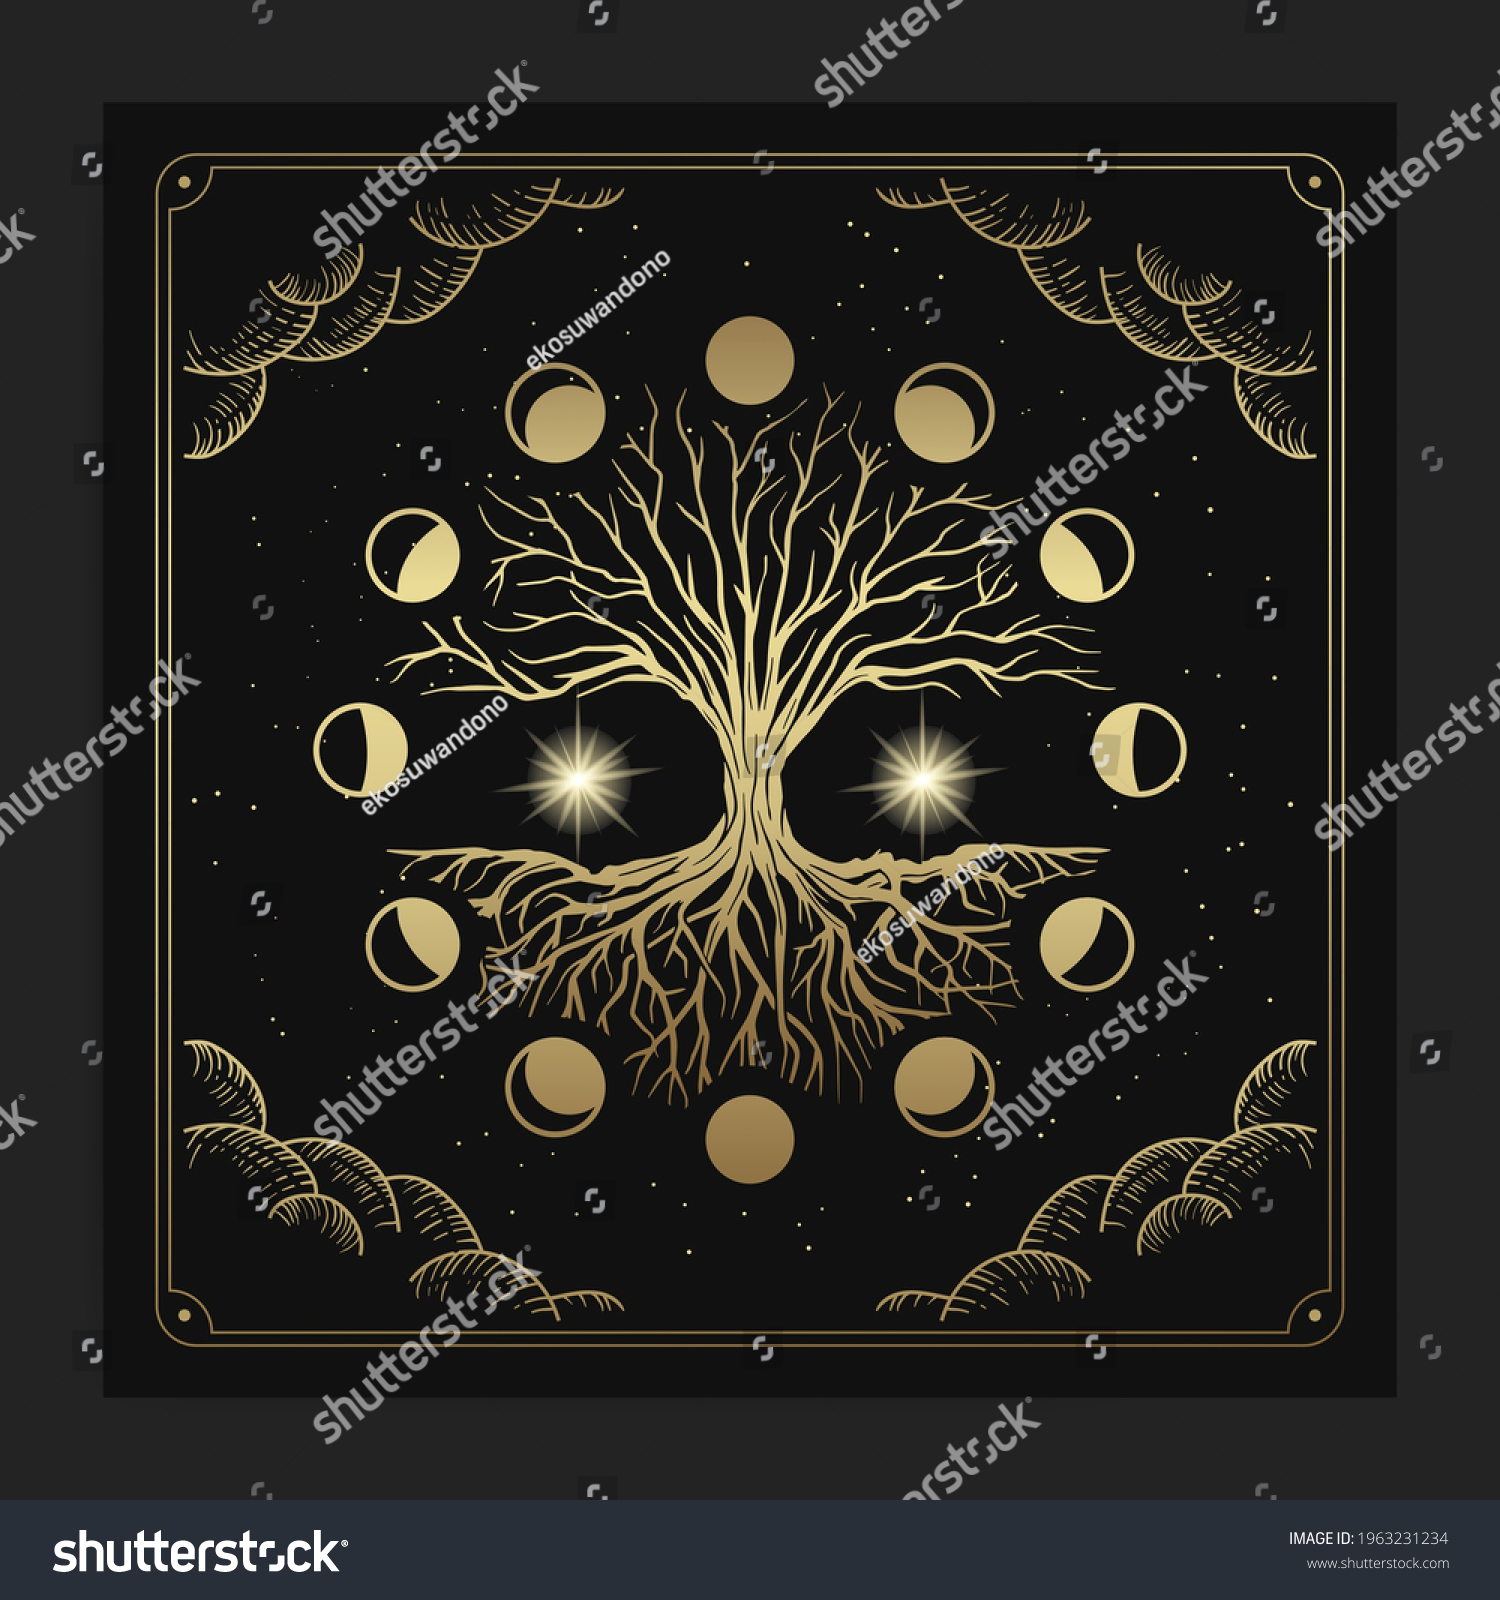 Magical sacred tree in moon phase decoration with engraving, hand drawn, luxury, celestial, esoteric, boho style, fit for spiritualist, religious, paranormal, tarot reader, astrologer or tattoo  #1963231234